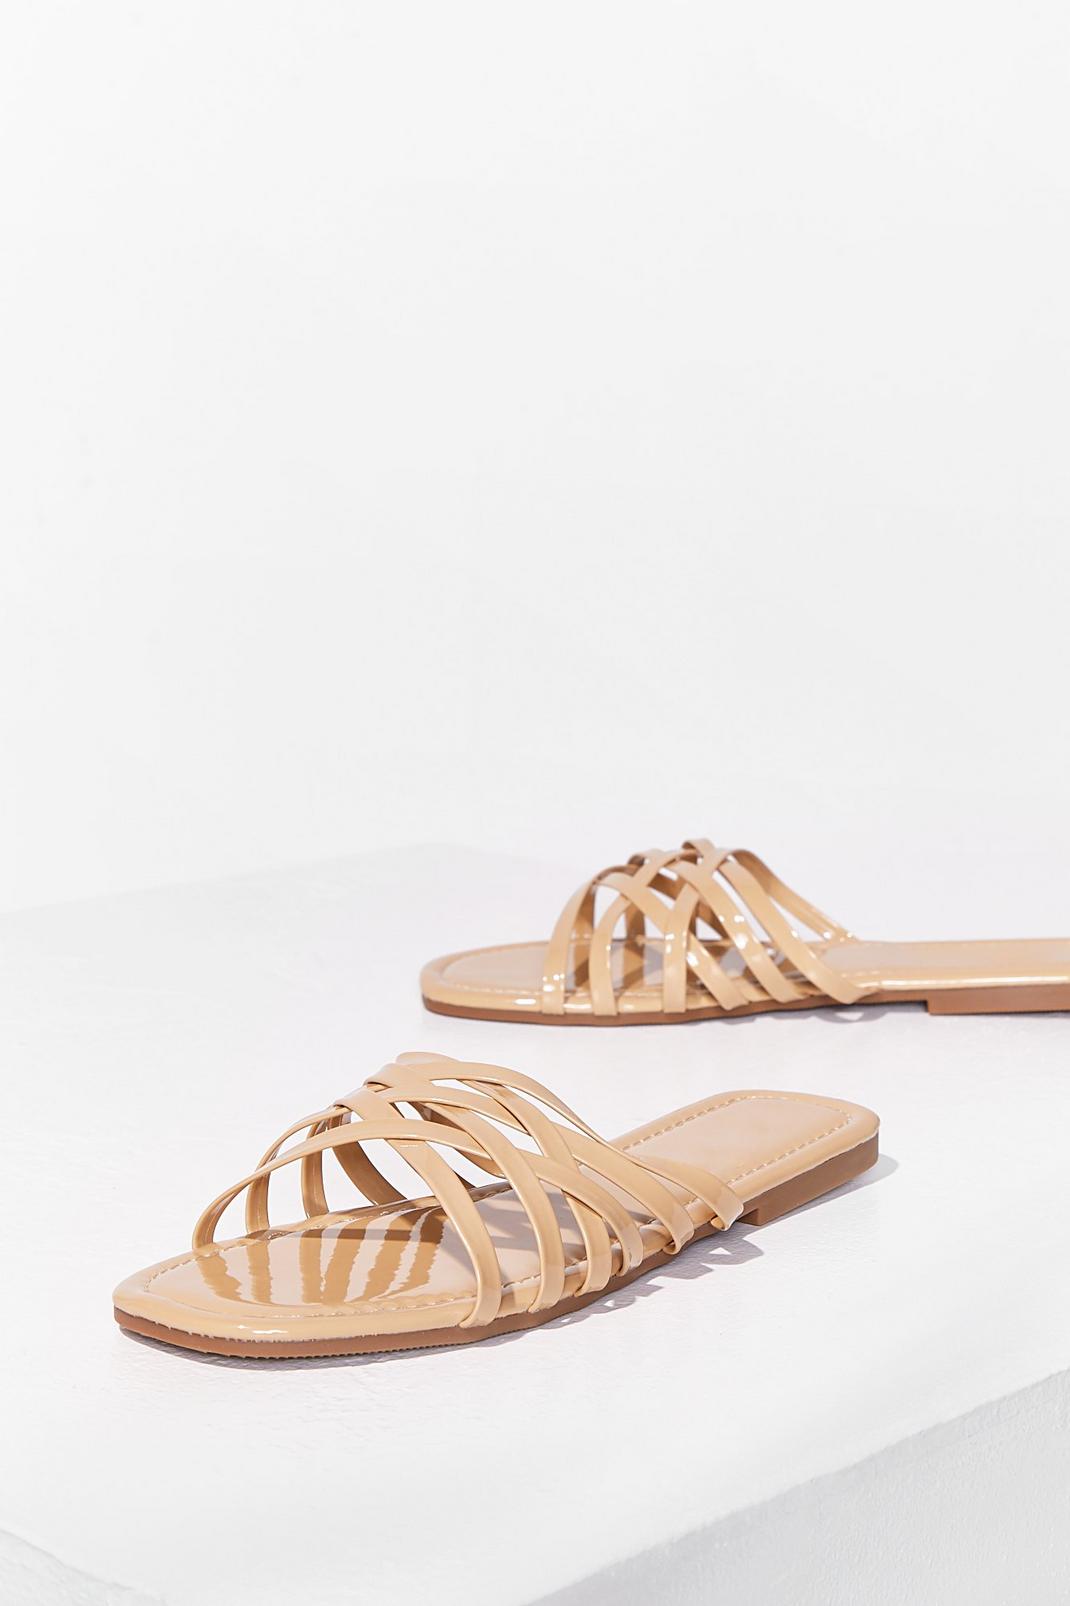 Who's Slide Are You On Faux Leather Flat Sandals image number 1